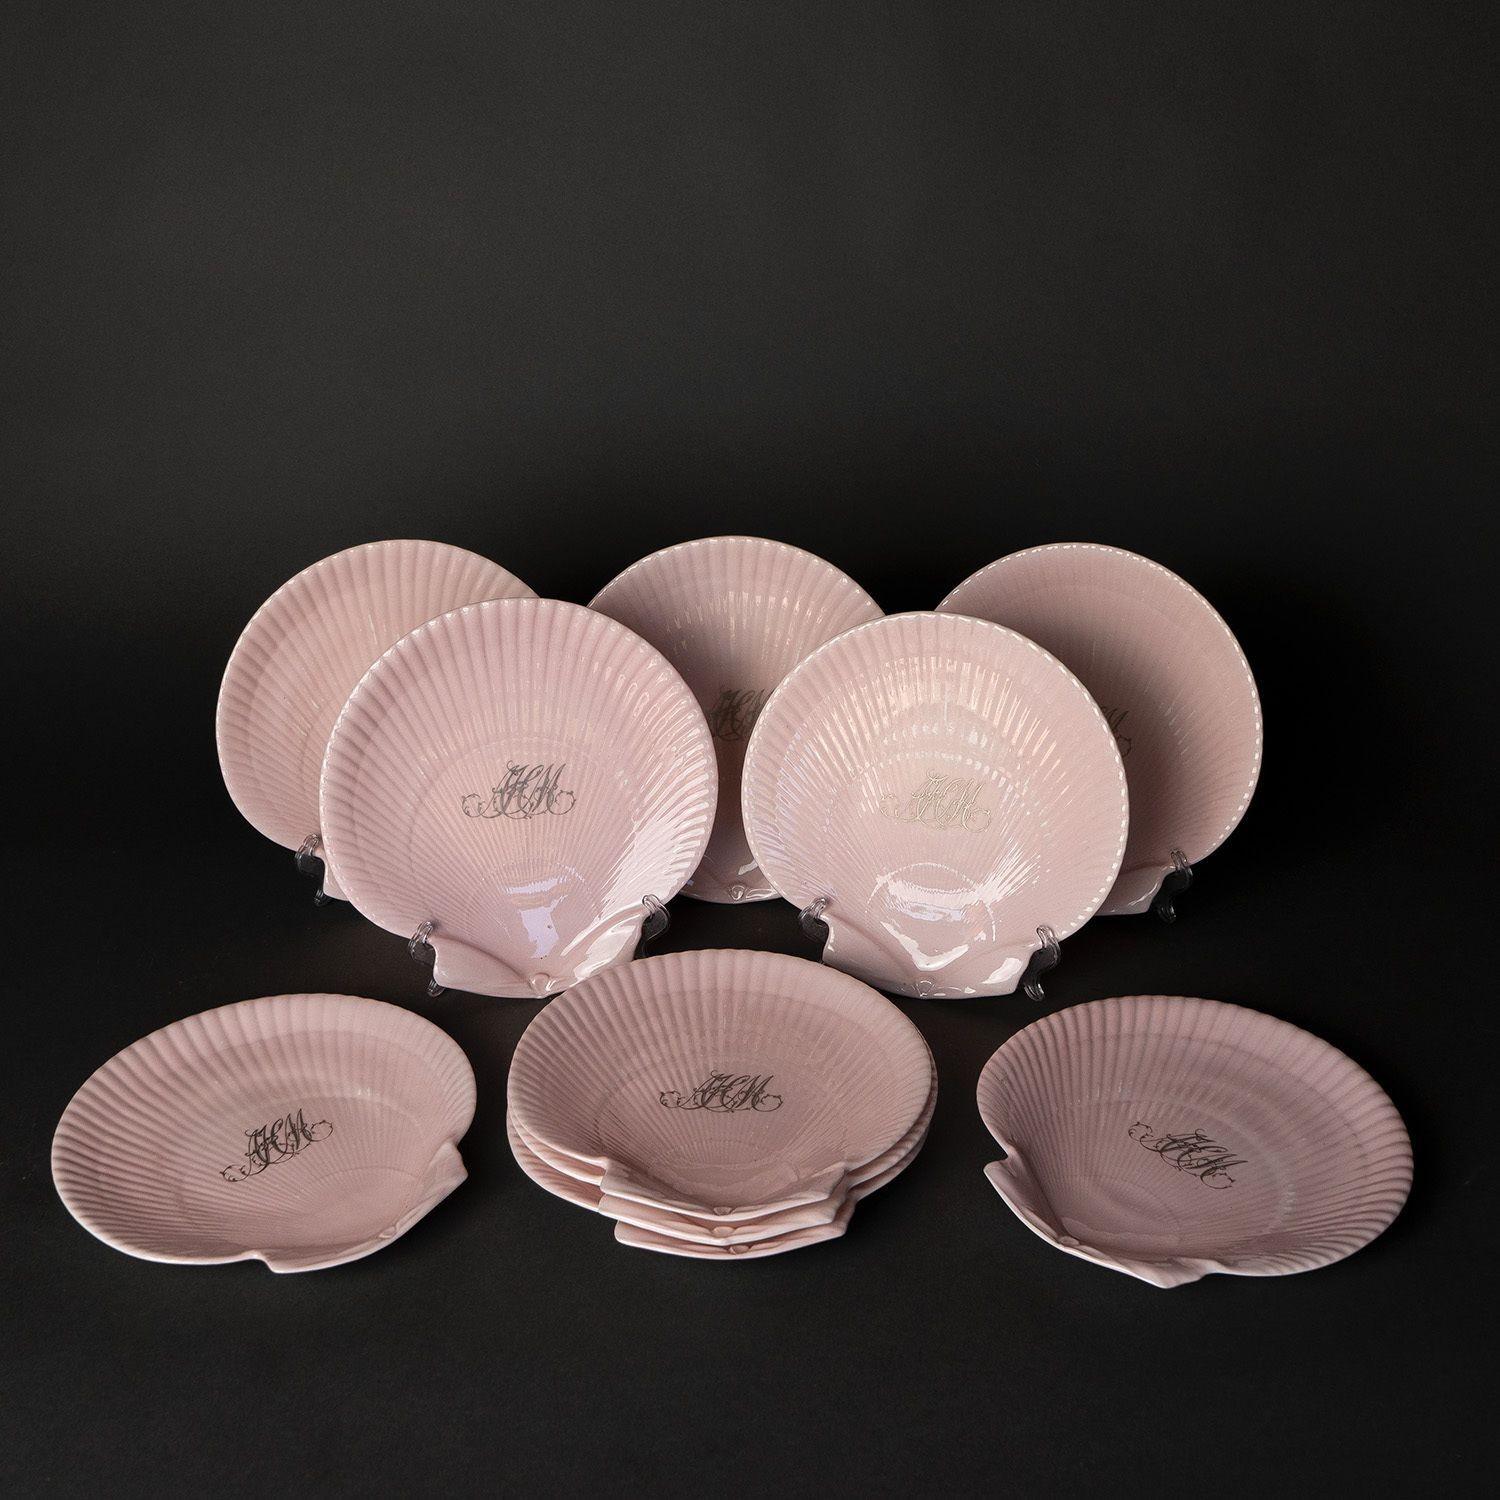 Pink Porcelain 'Nautilus' Dessert Service by Wedgwood for John Mortlock, 1880s For Sale 4